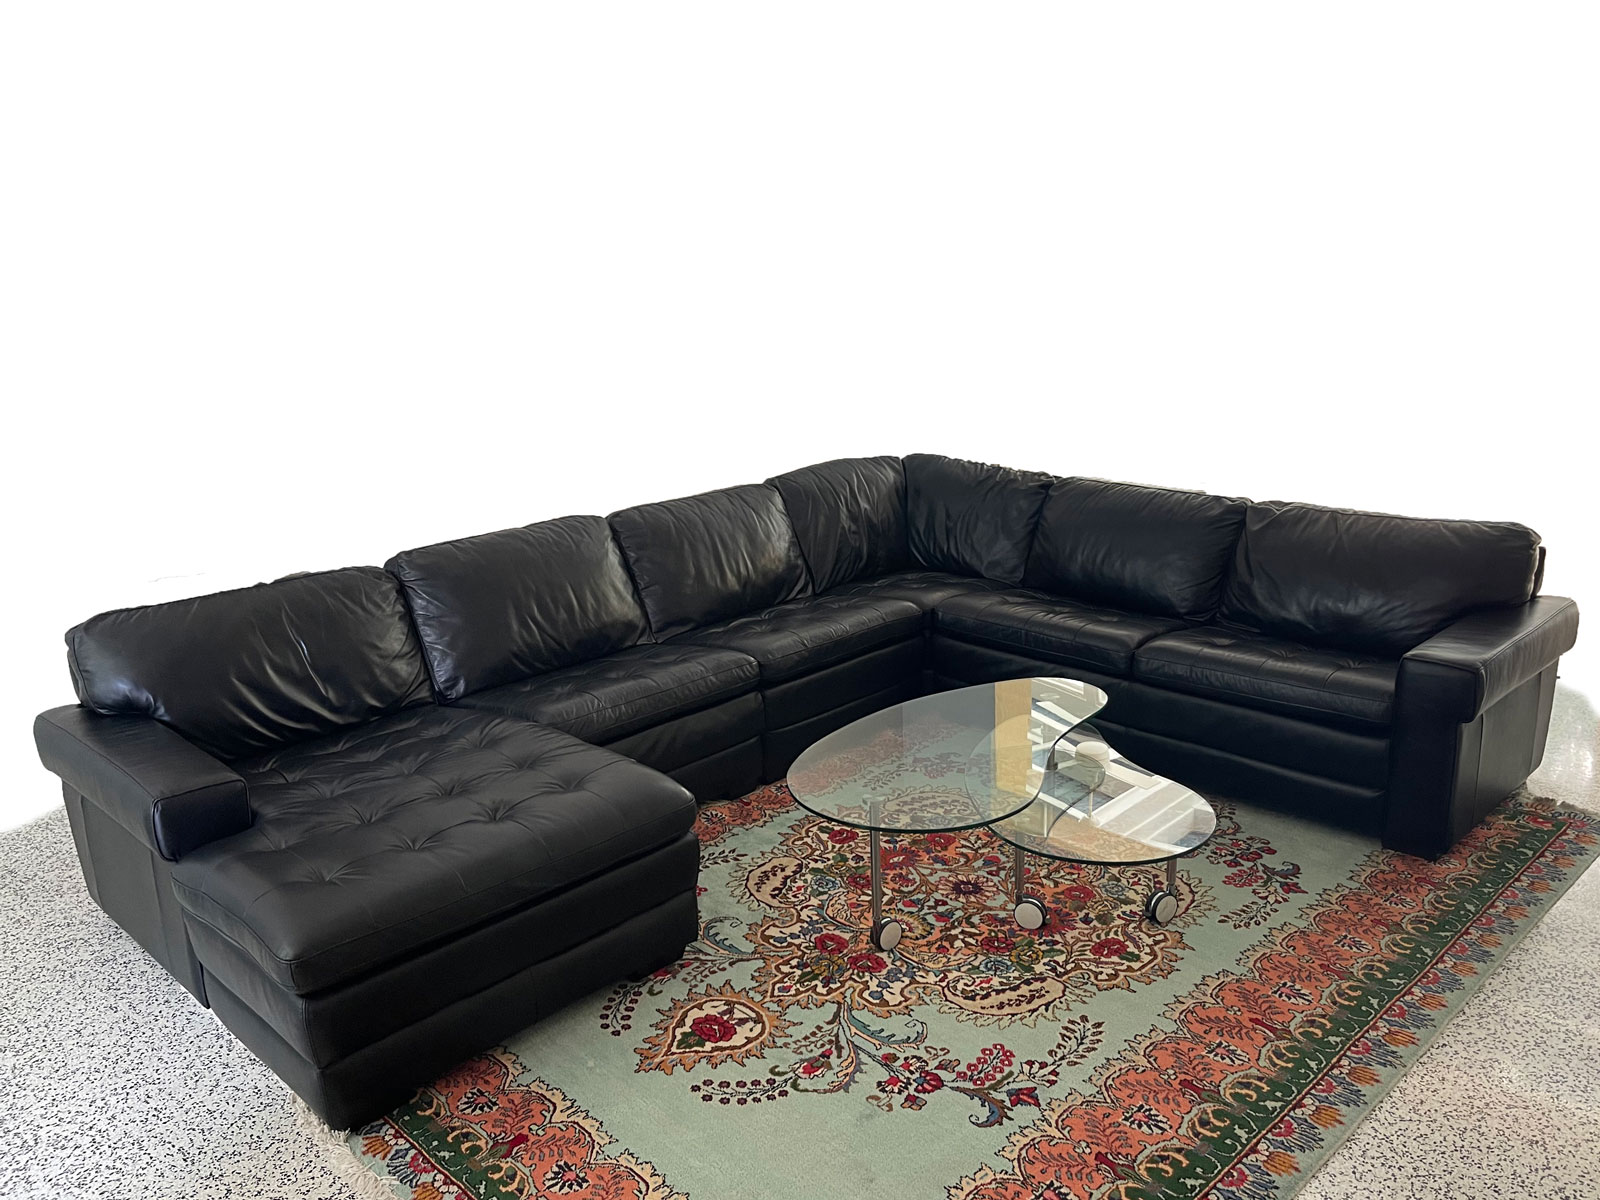 BLACK LEATHER SECTIONAL COUCH  36bd1b